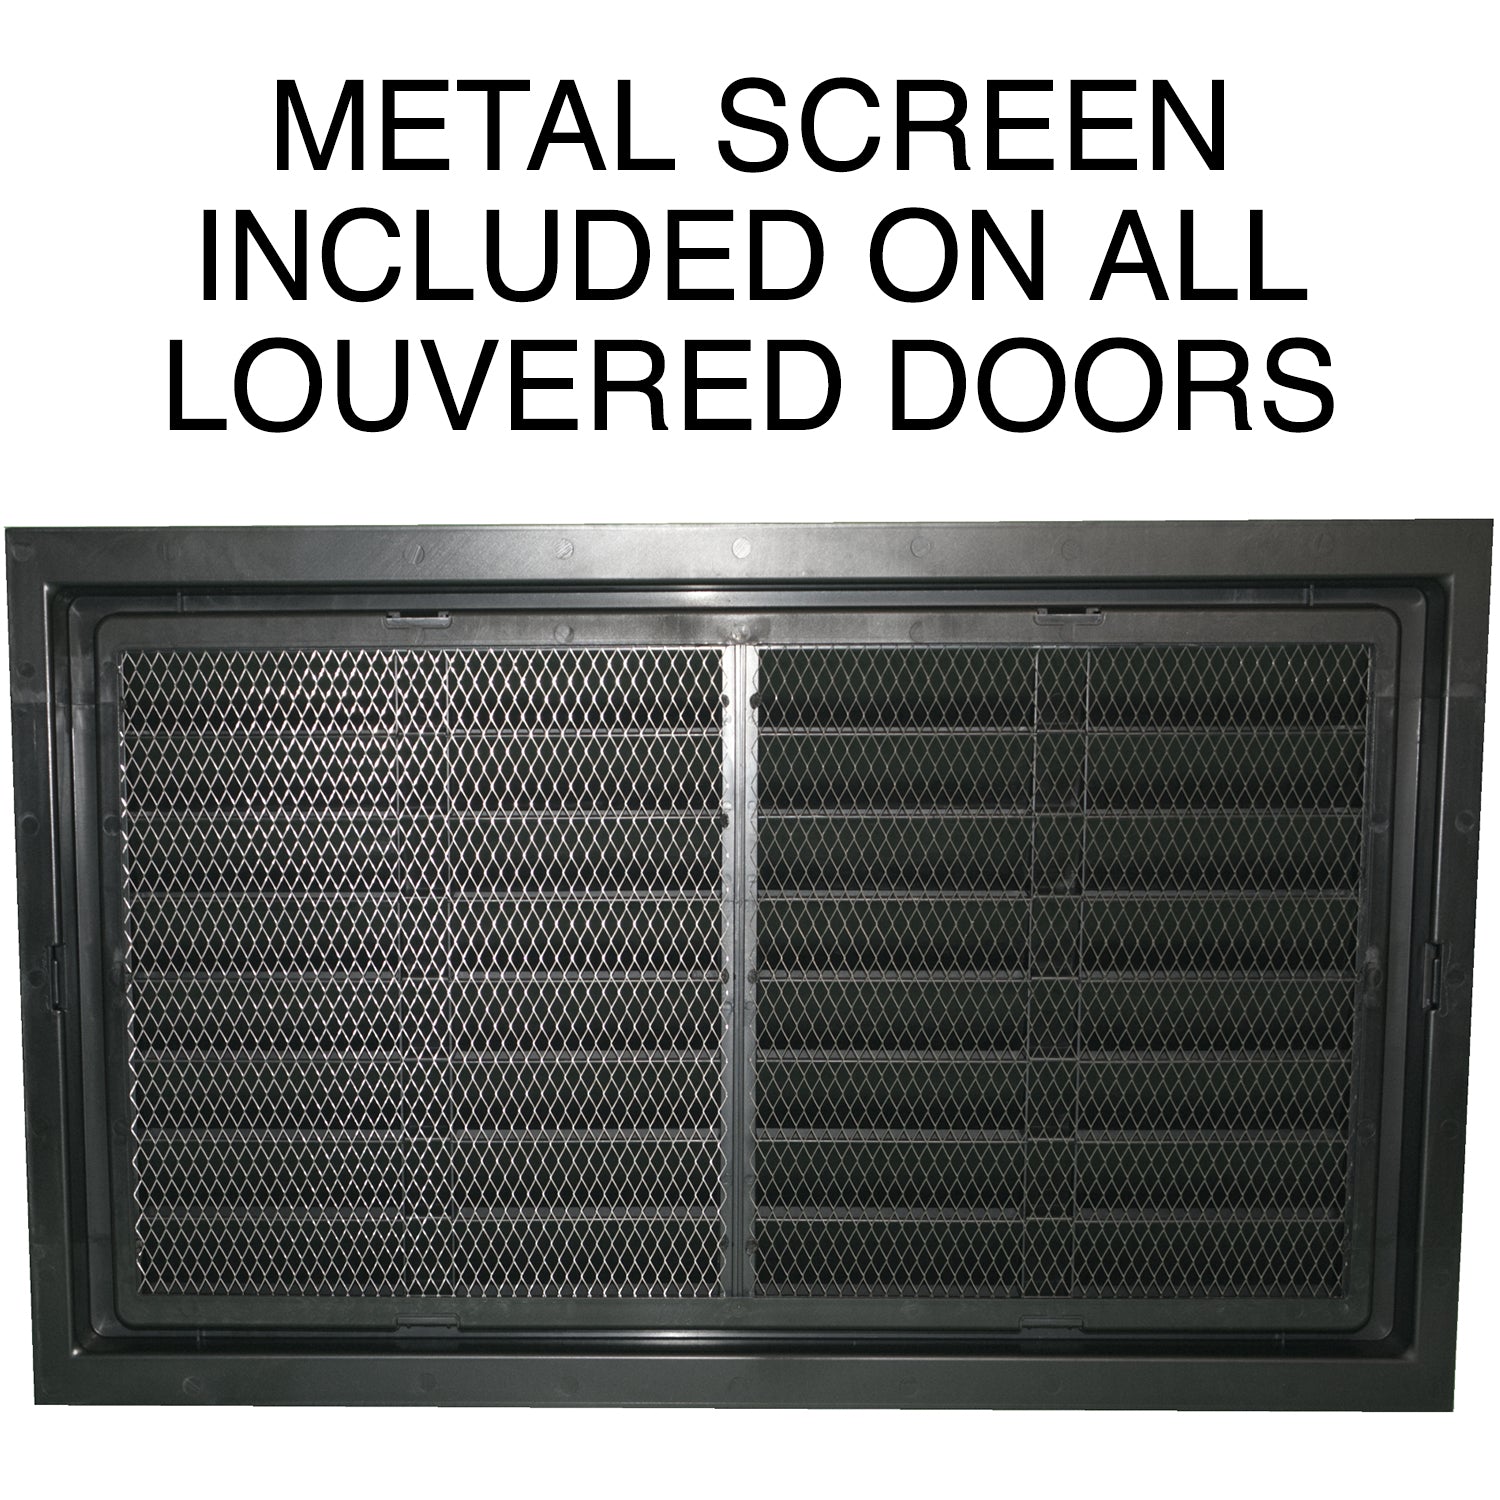 Metal screen included on all louvered doors